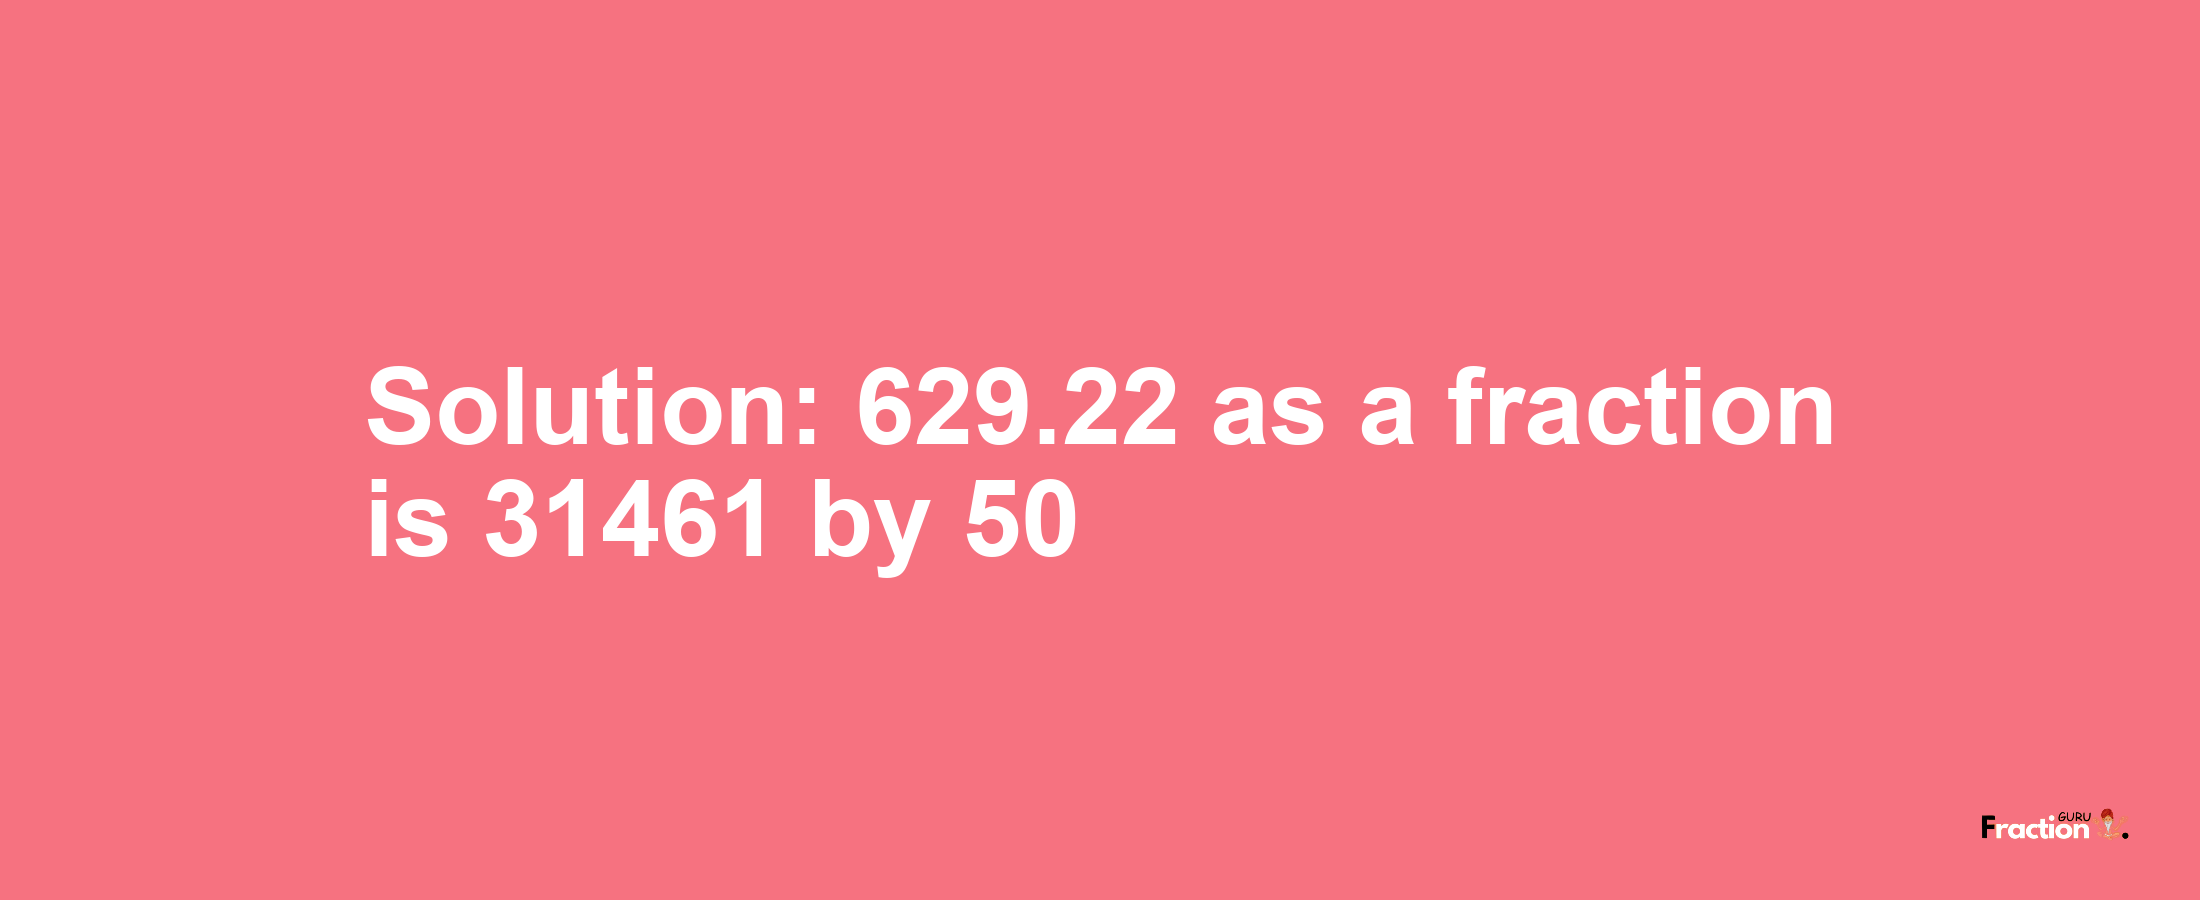 Solution:629.22 as a fraction is 31461/50